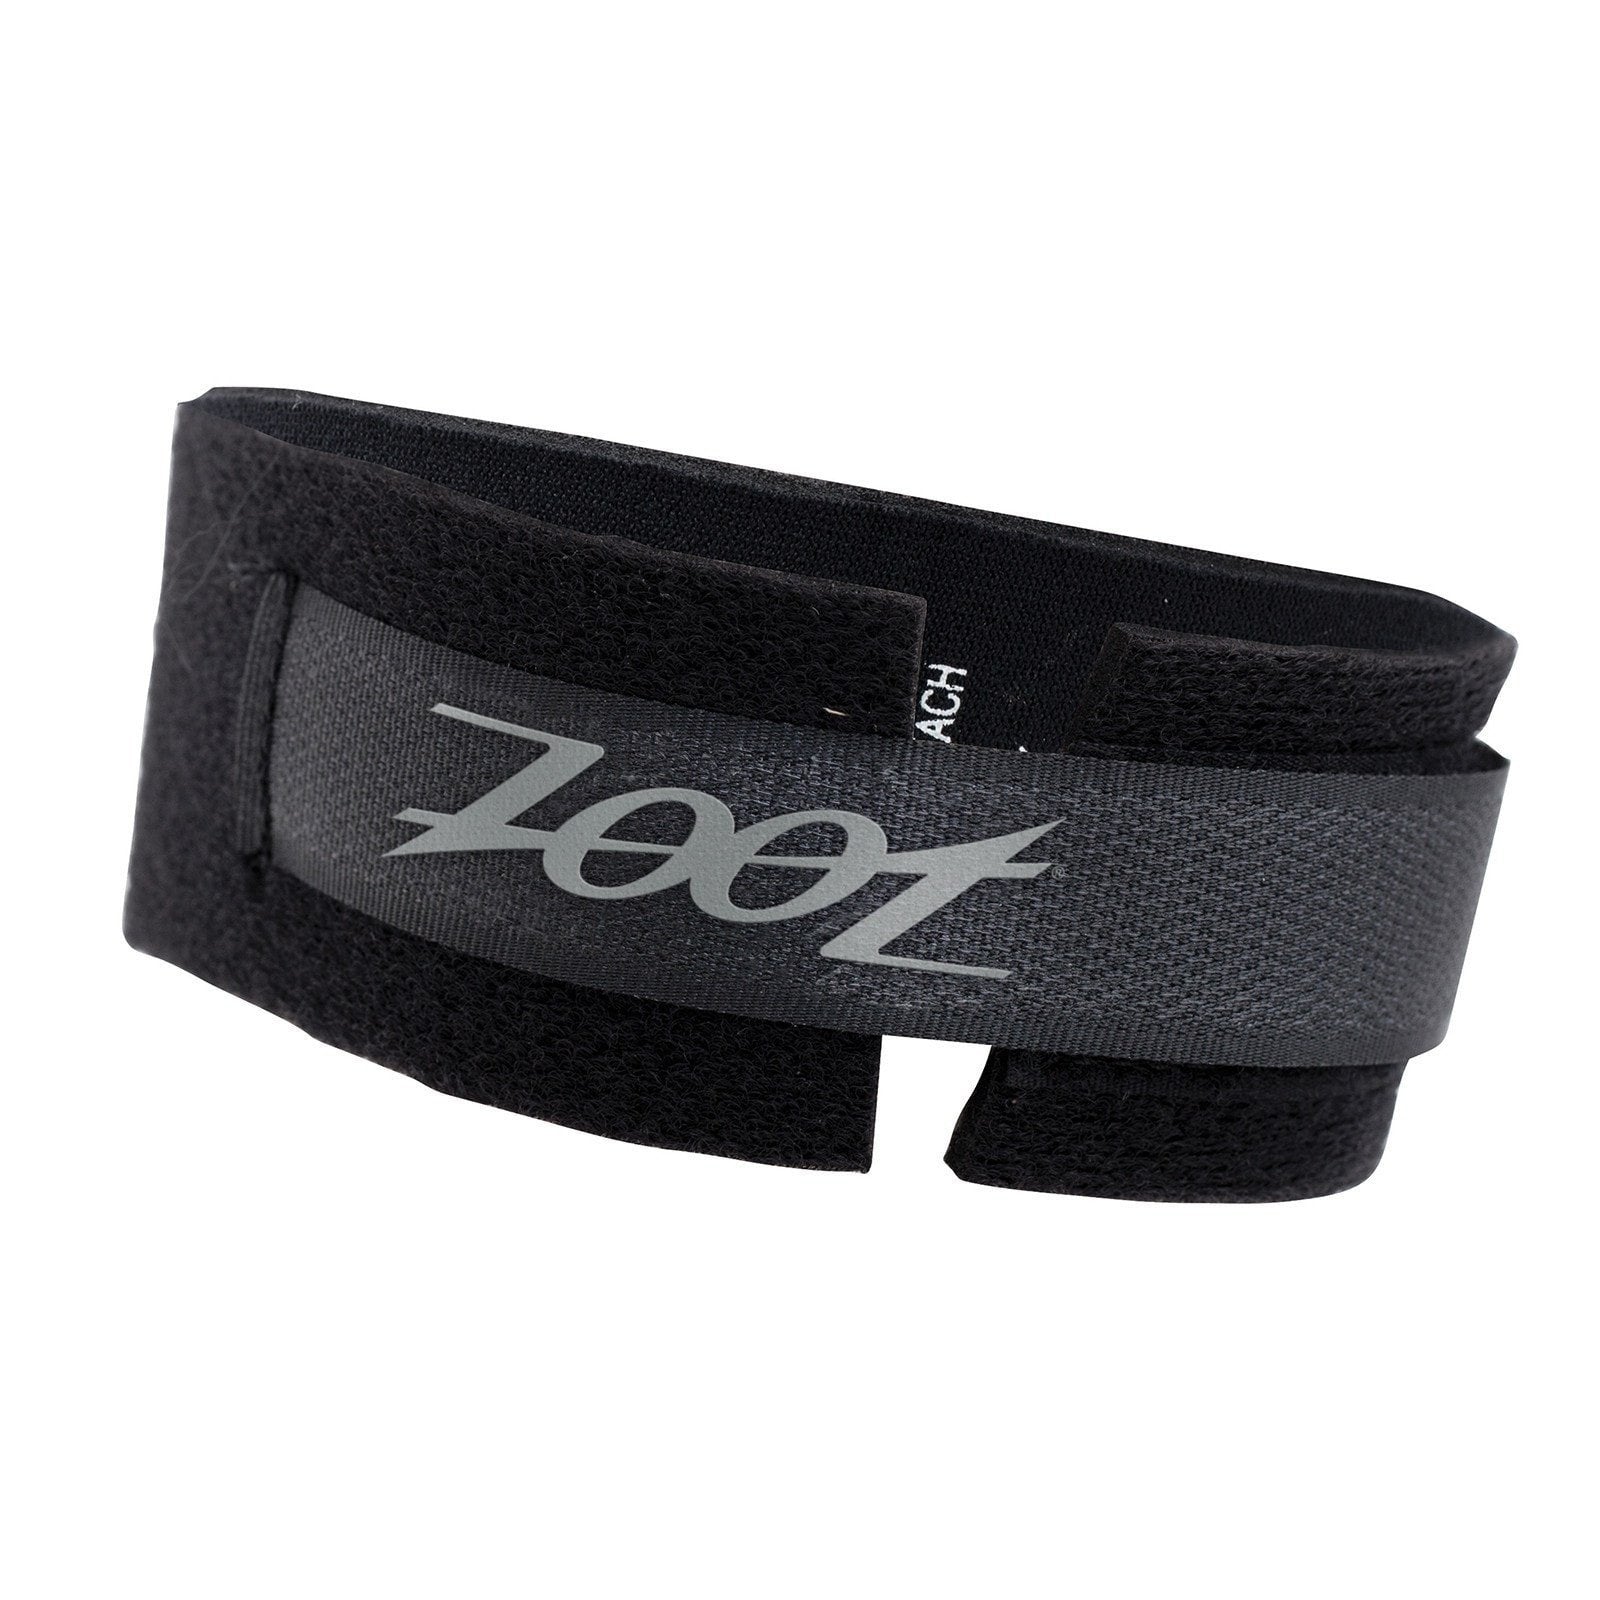 Zoot Sports Timing Chip Strap